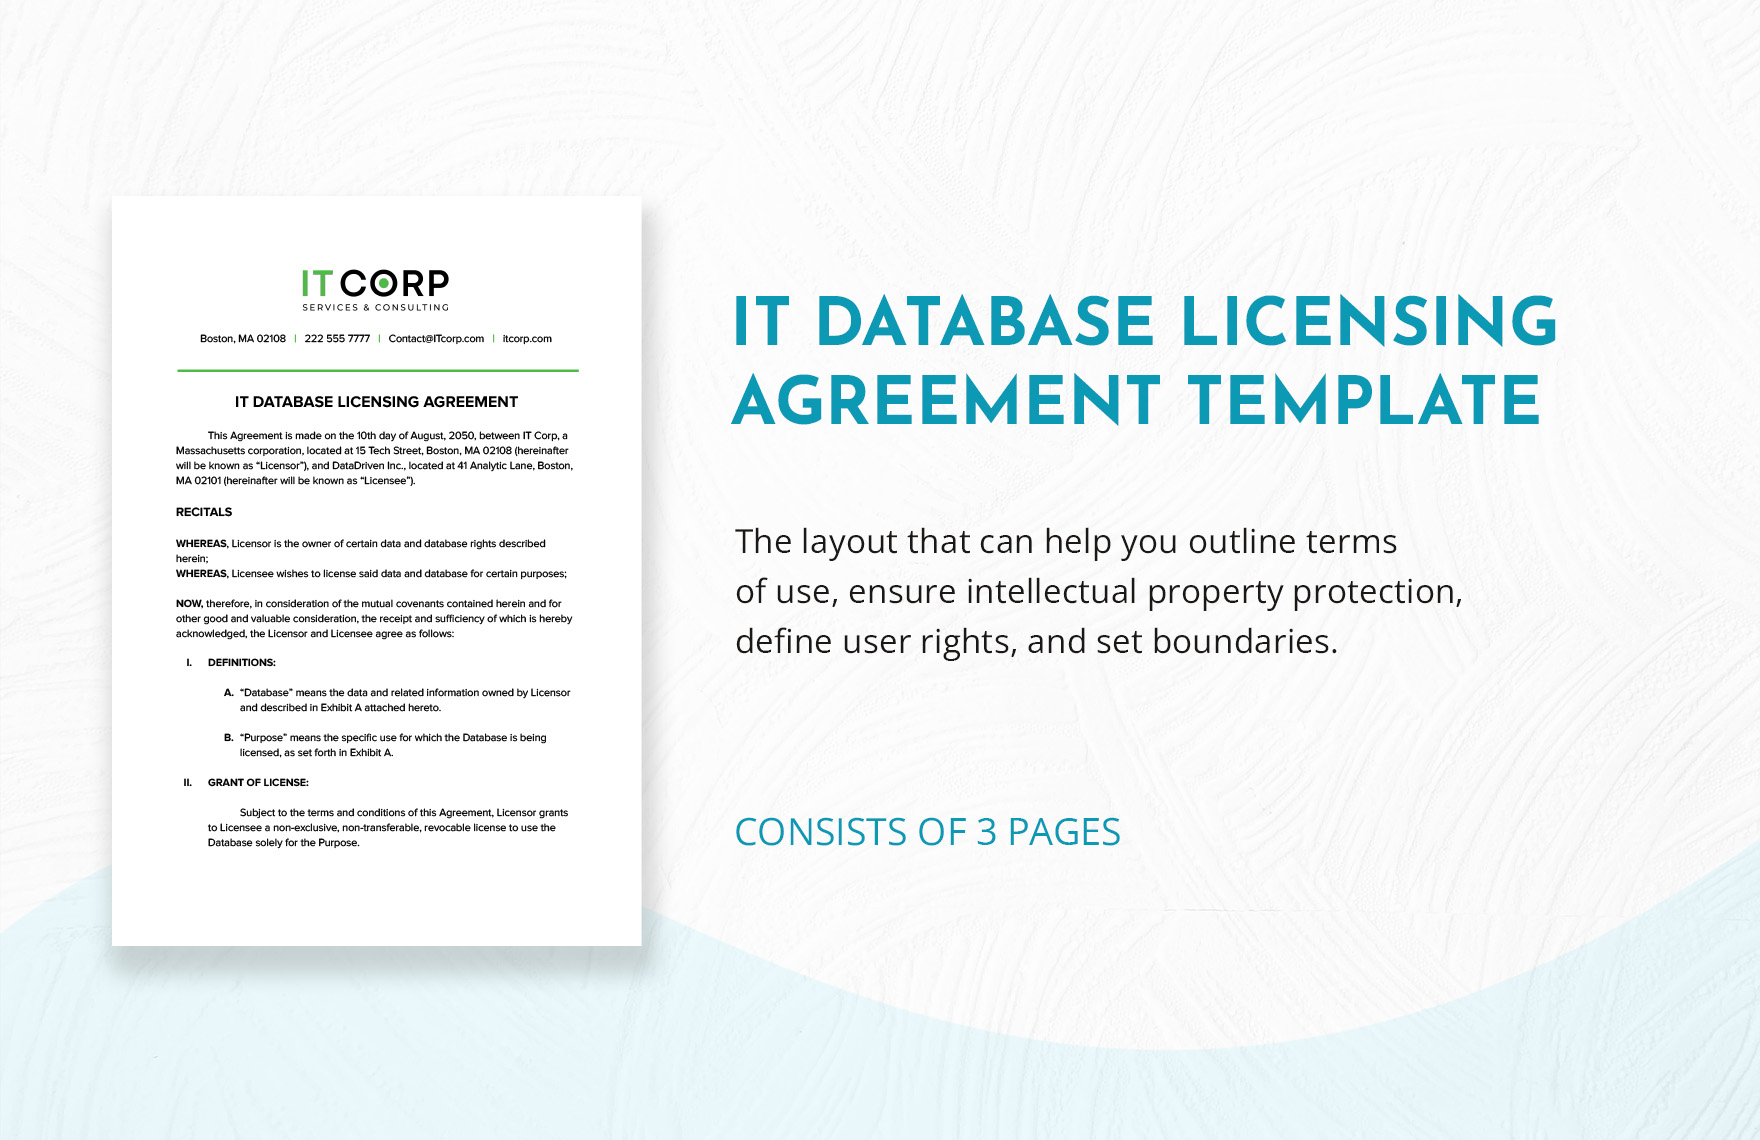 IT Database Licensing Agreement Template in Word, Google Docs, PDF